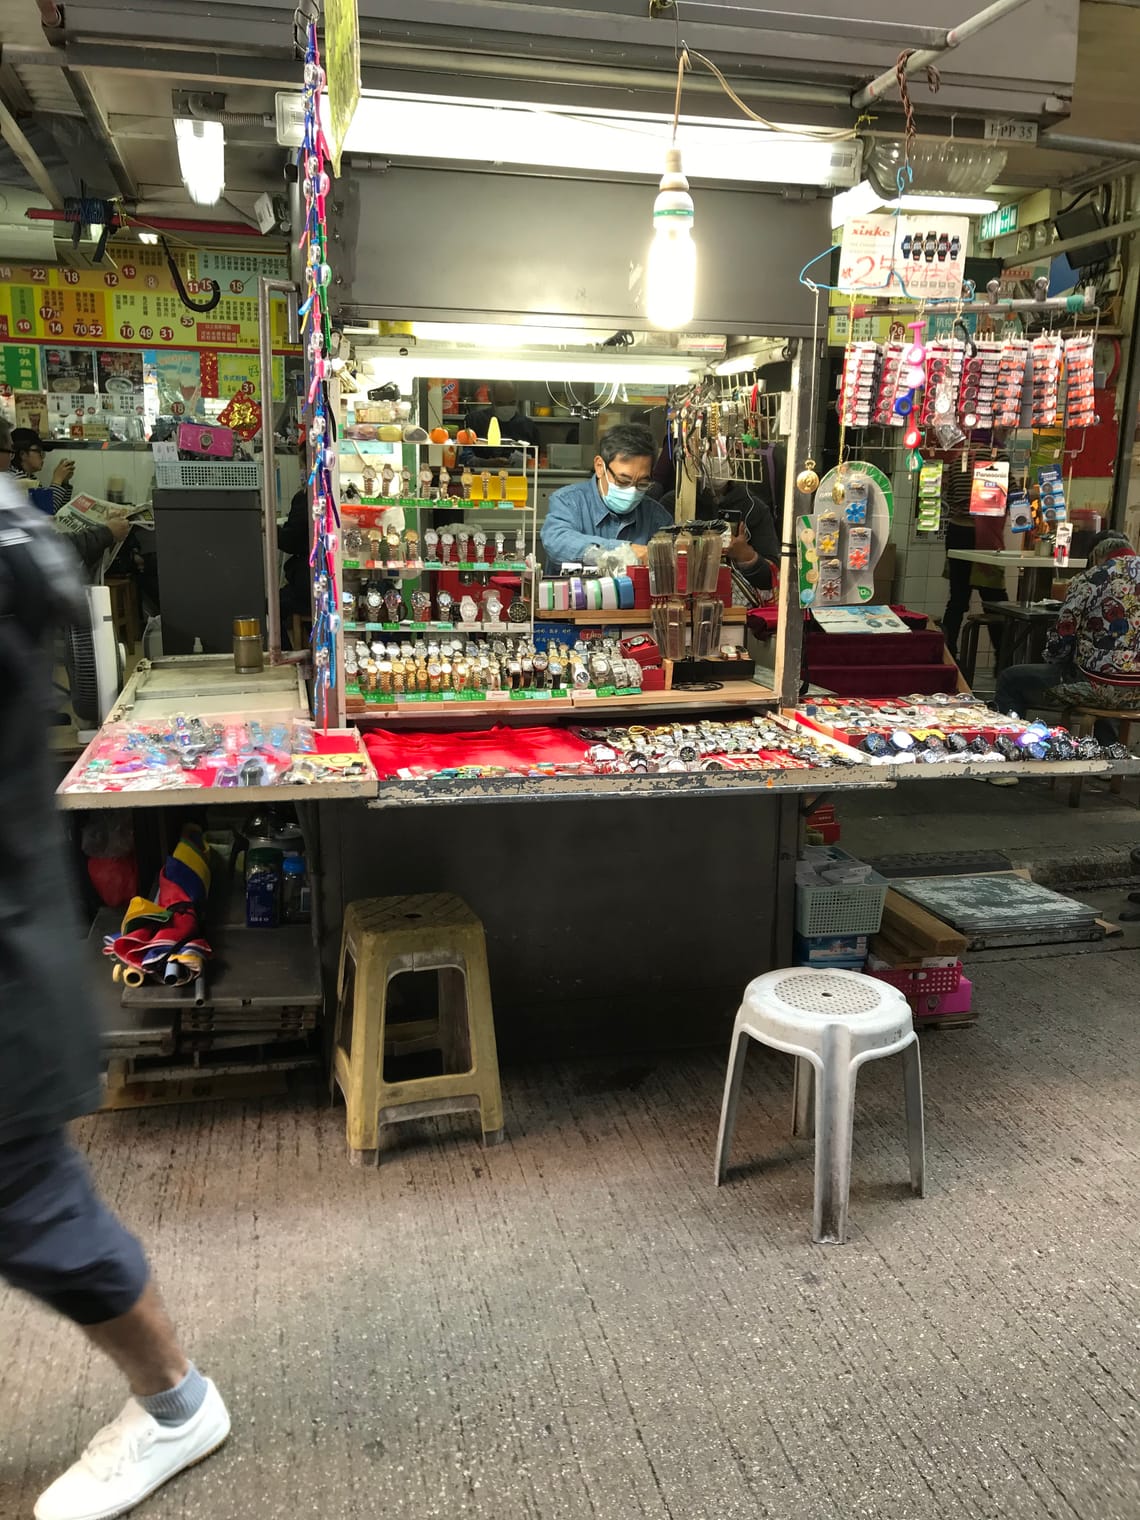 A seller of watches sits within a street stall cabinet. There are displays of watches and watch batteries on sale.